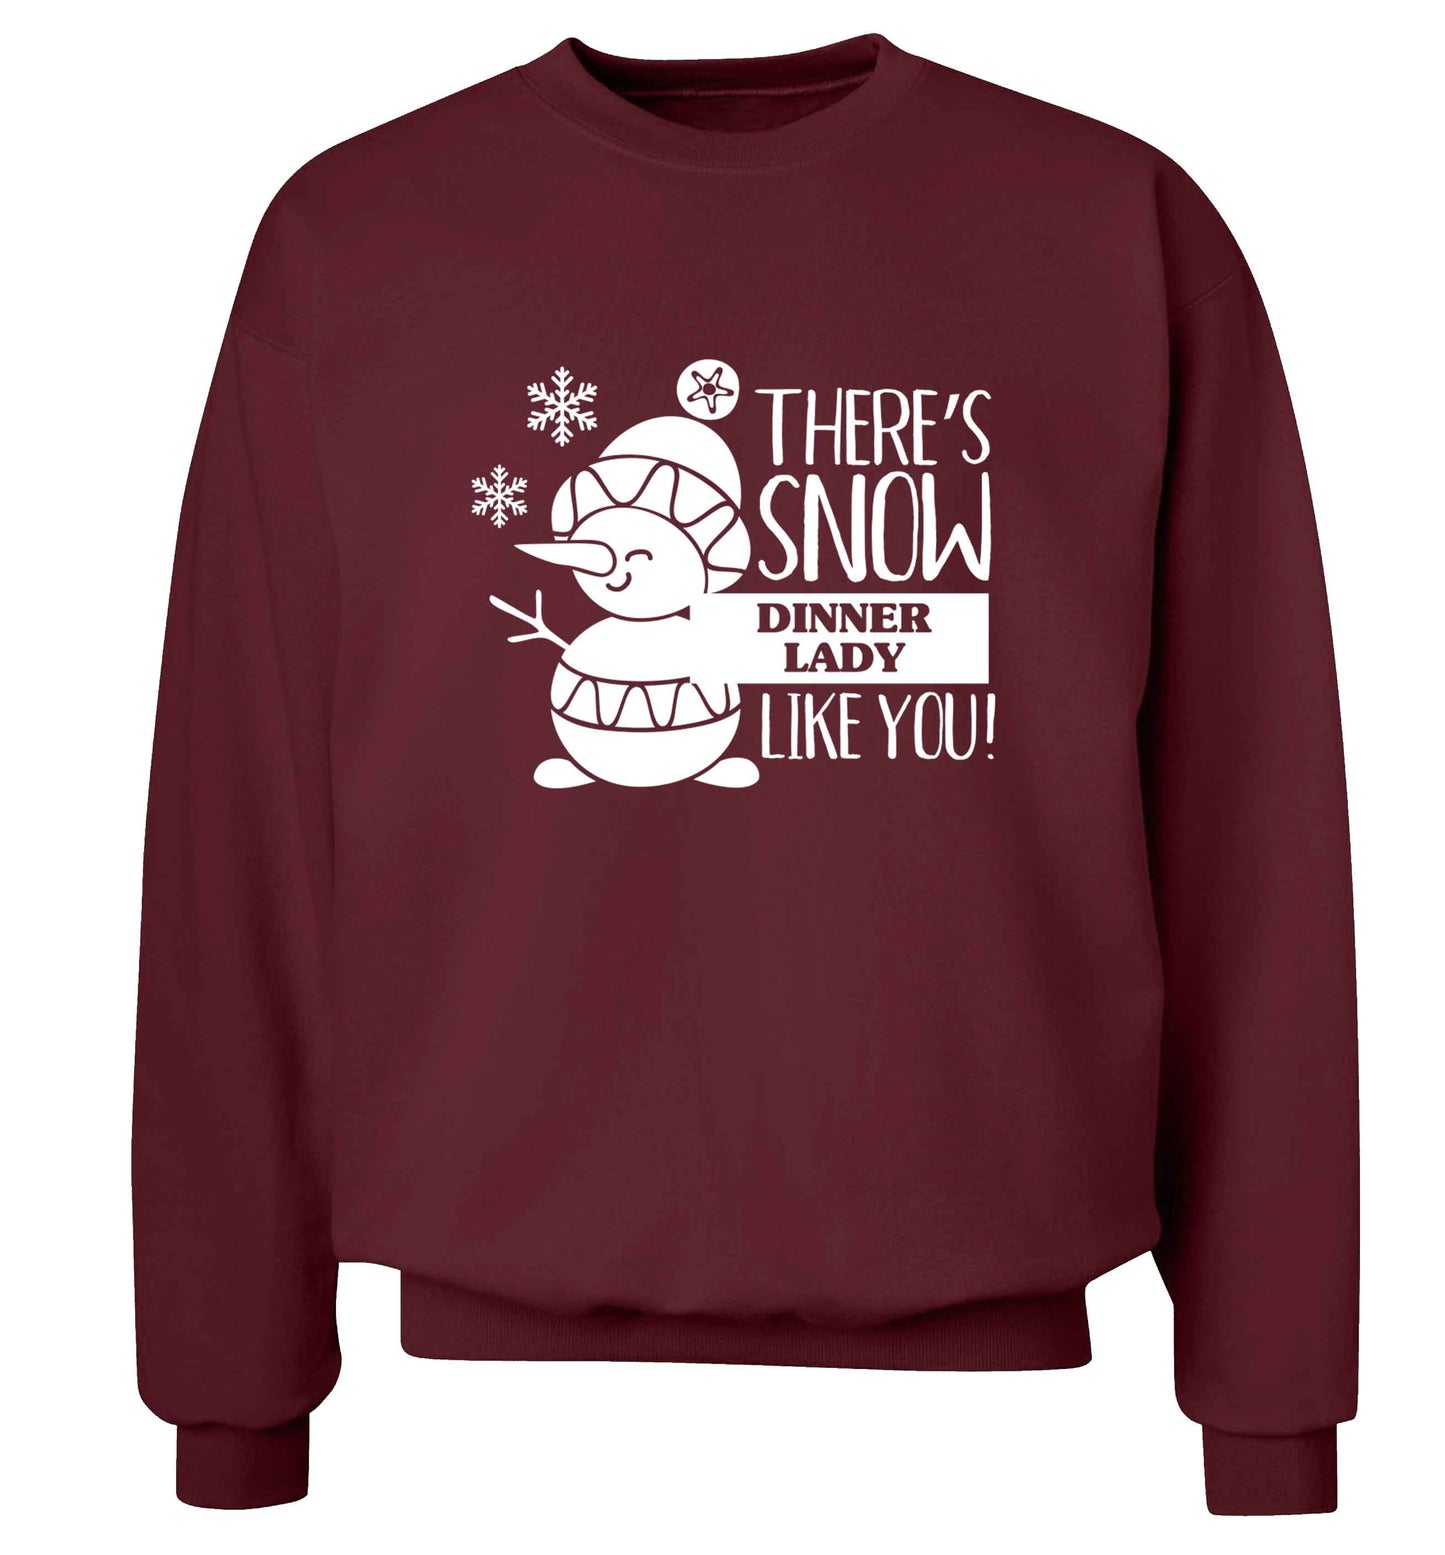 There's snow dinner lady like you adult's unisex maroon sweater 2XL